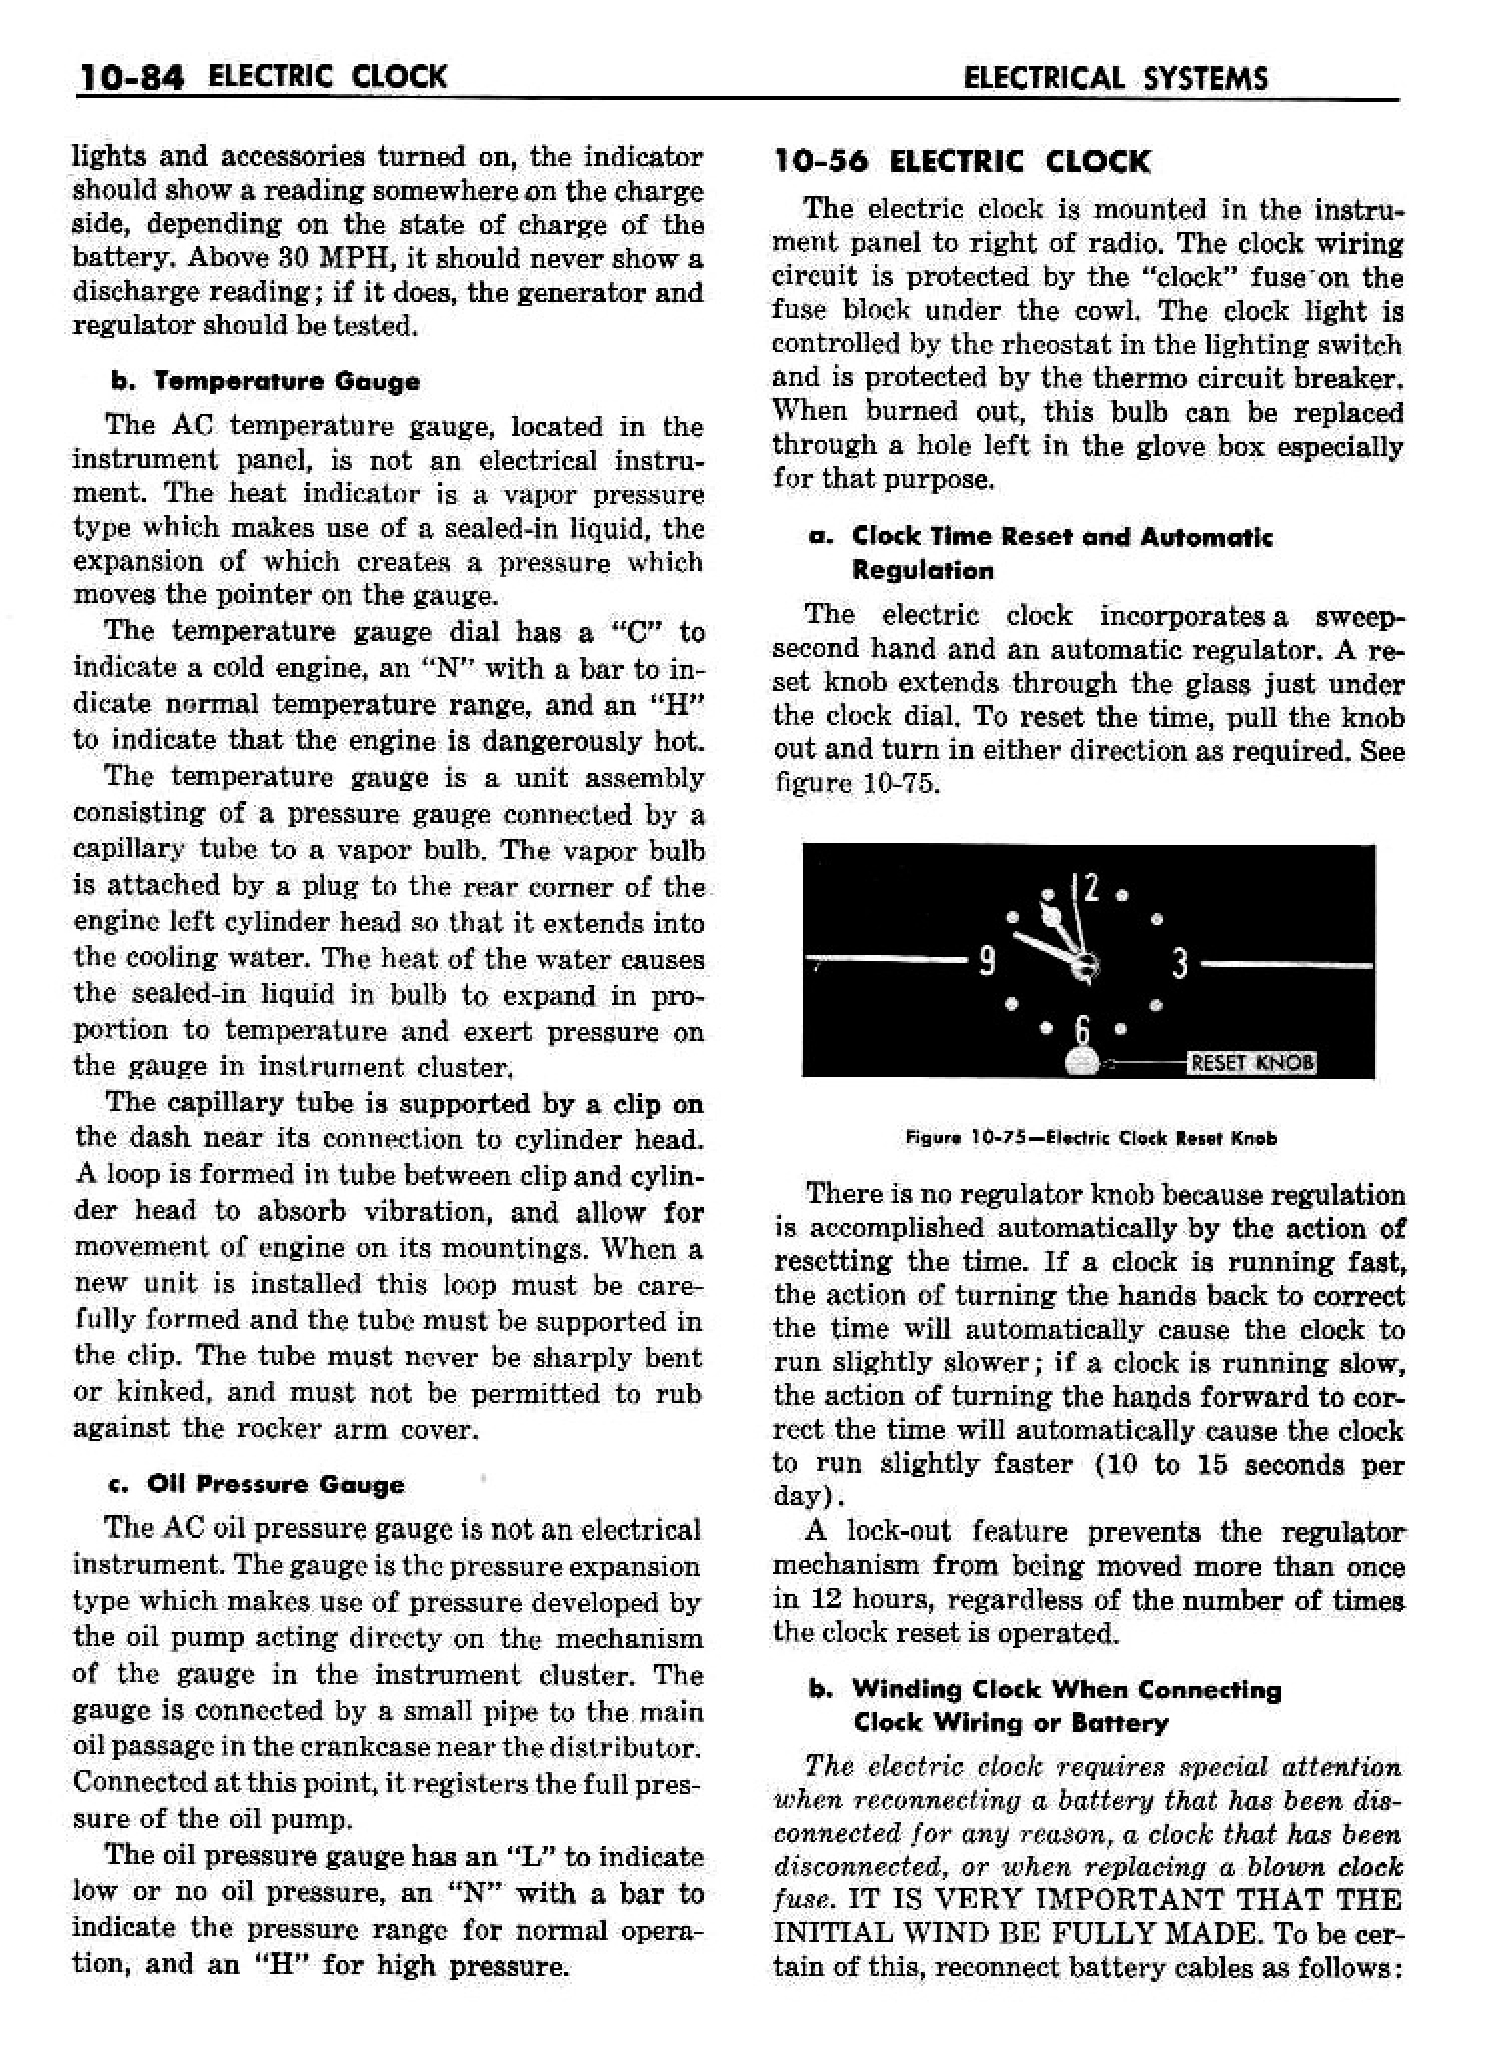 n_11 1958 Buick Shop Manual - Electrical Systems_84.jpg